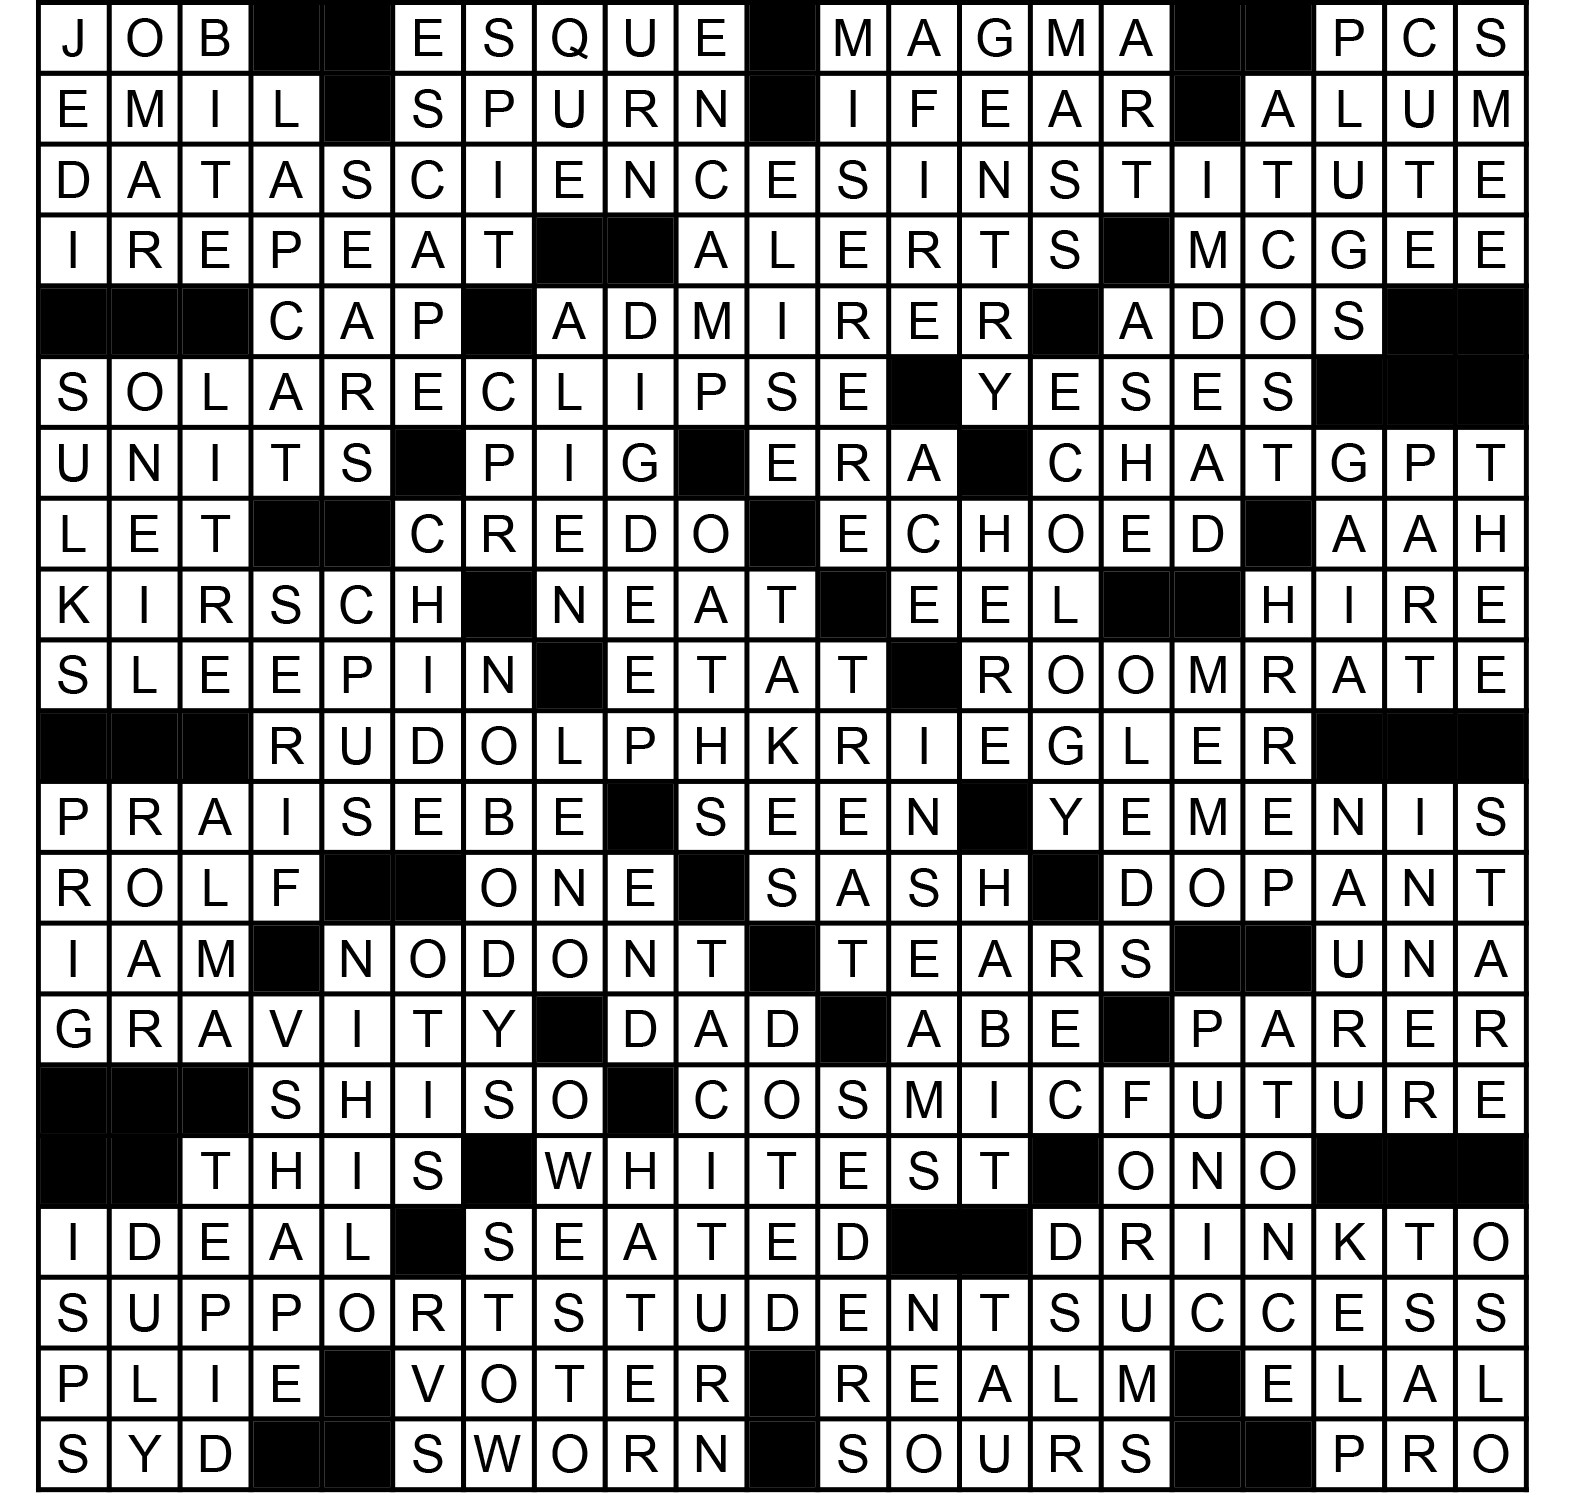 A crossword filled out with all the answers. Answers are also listed below.